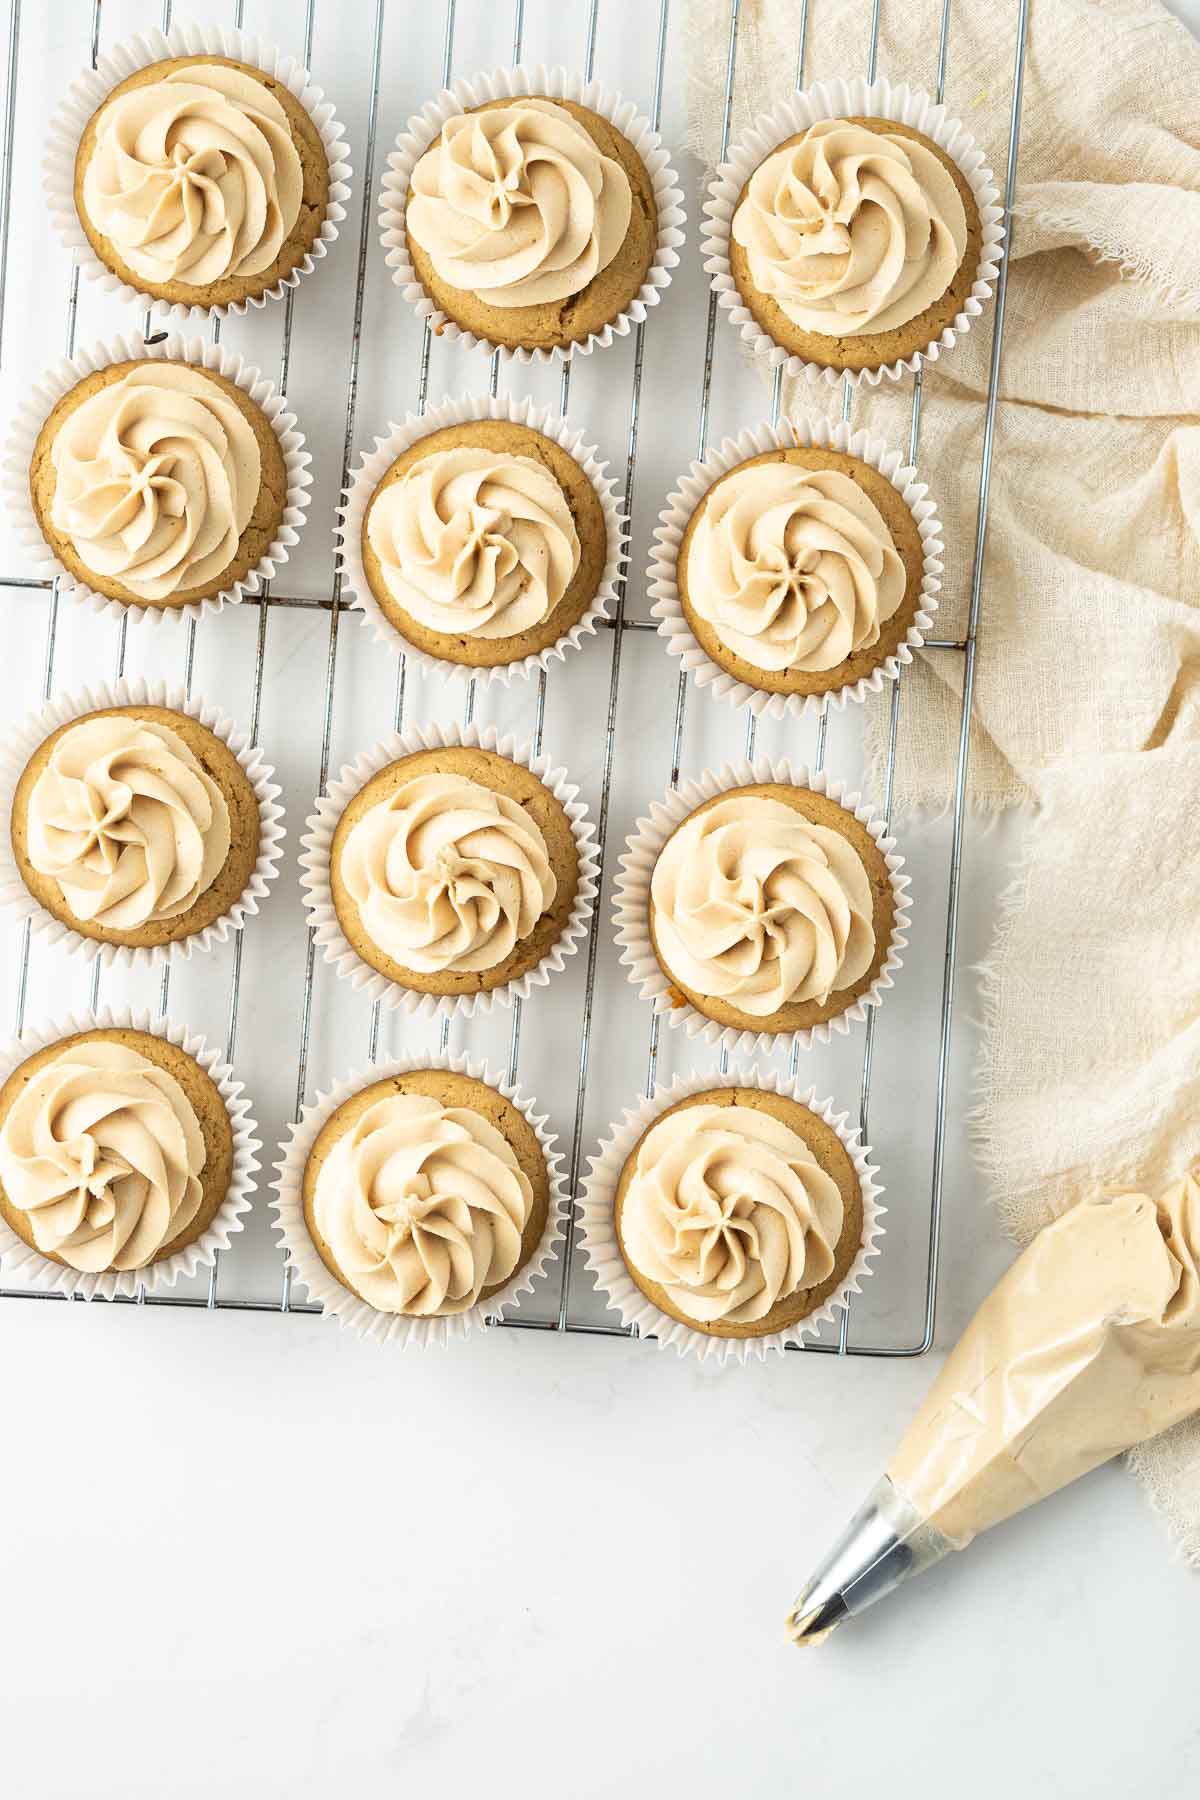 Vegan biscoff cupcakes with iscoff buttercream frosting.